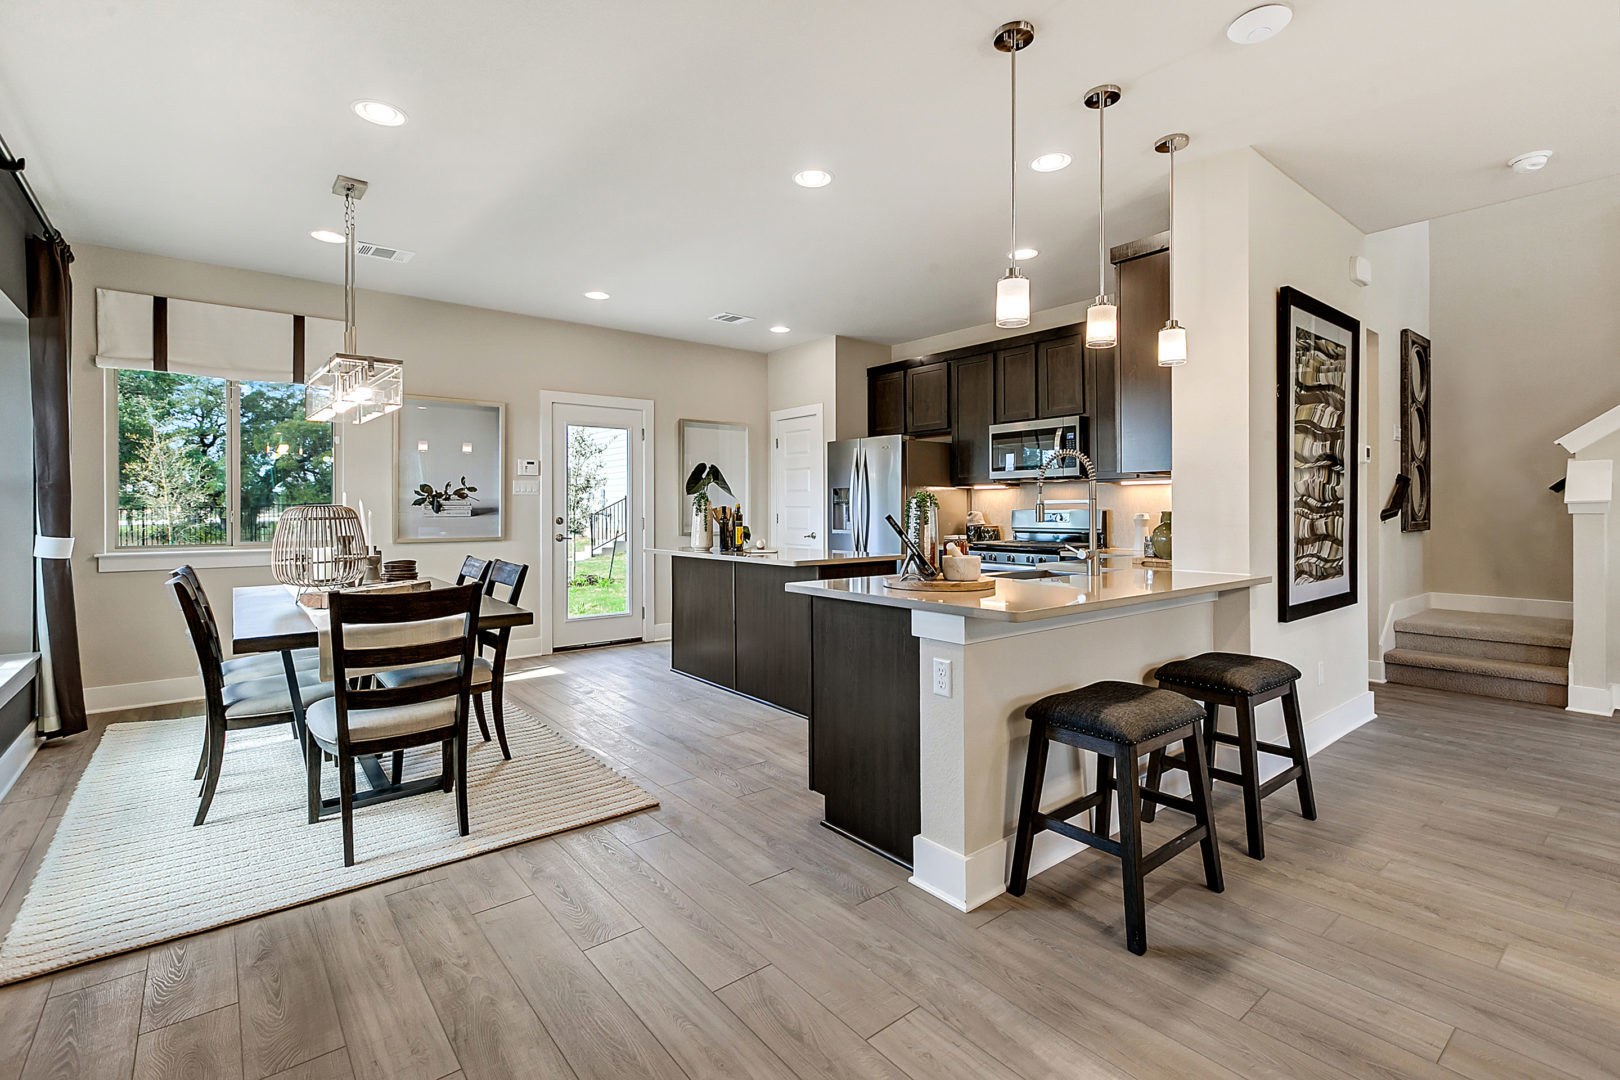 Valley Vista Community Model Home Kitchen And Dining Space